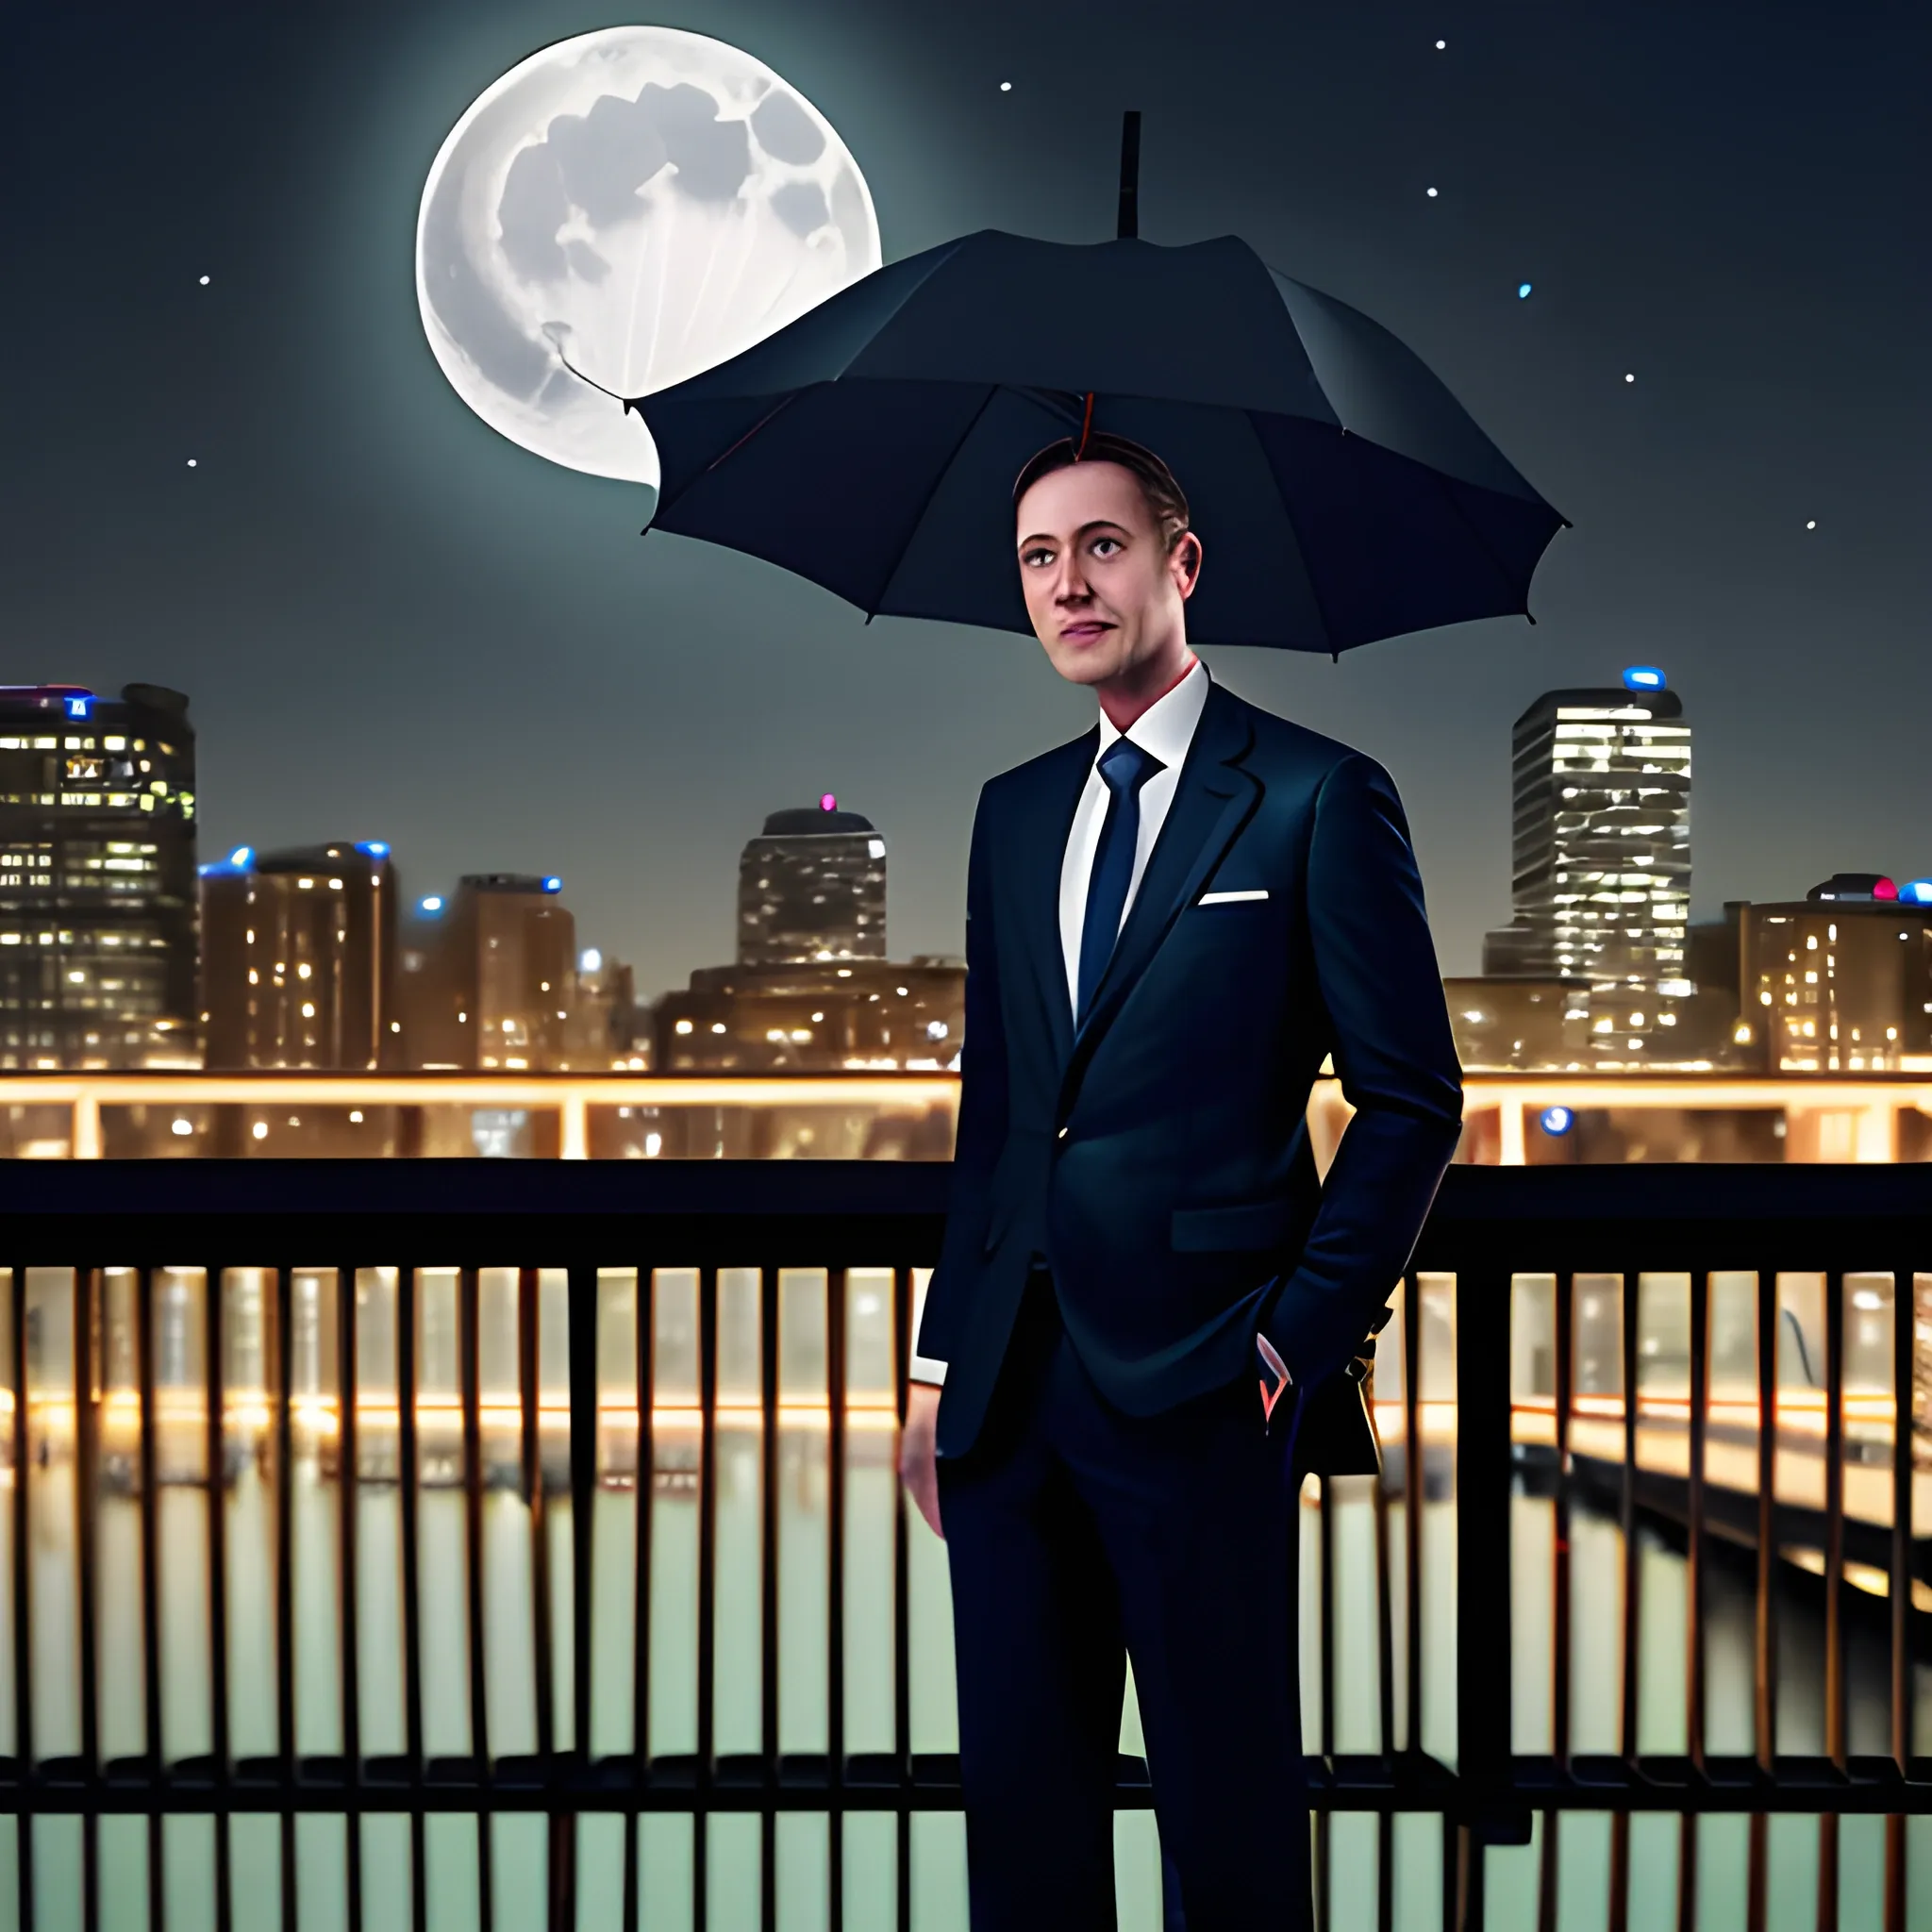 A realistic photo of a man in a suit standing on a bridge with an umbrella in his hand, with a city night view in the background and a bright moon in the sky